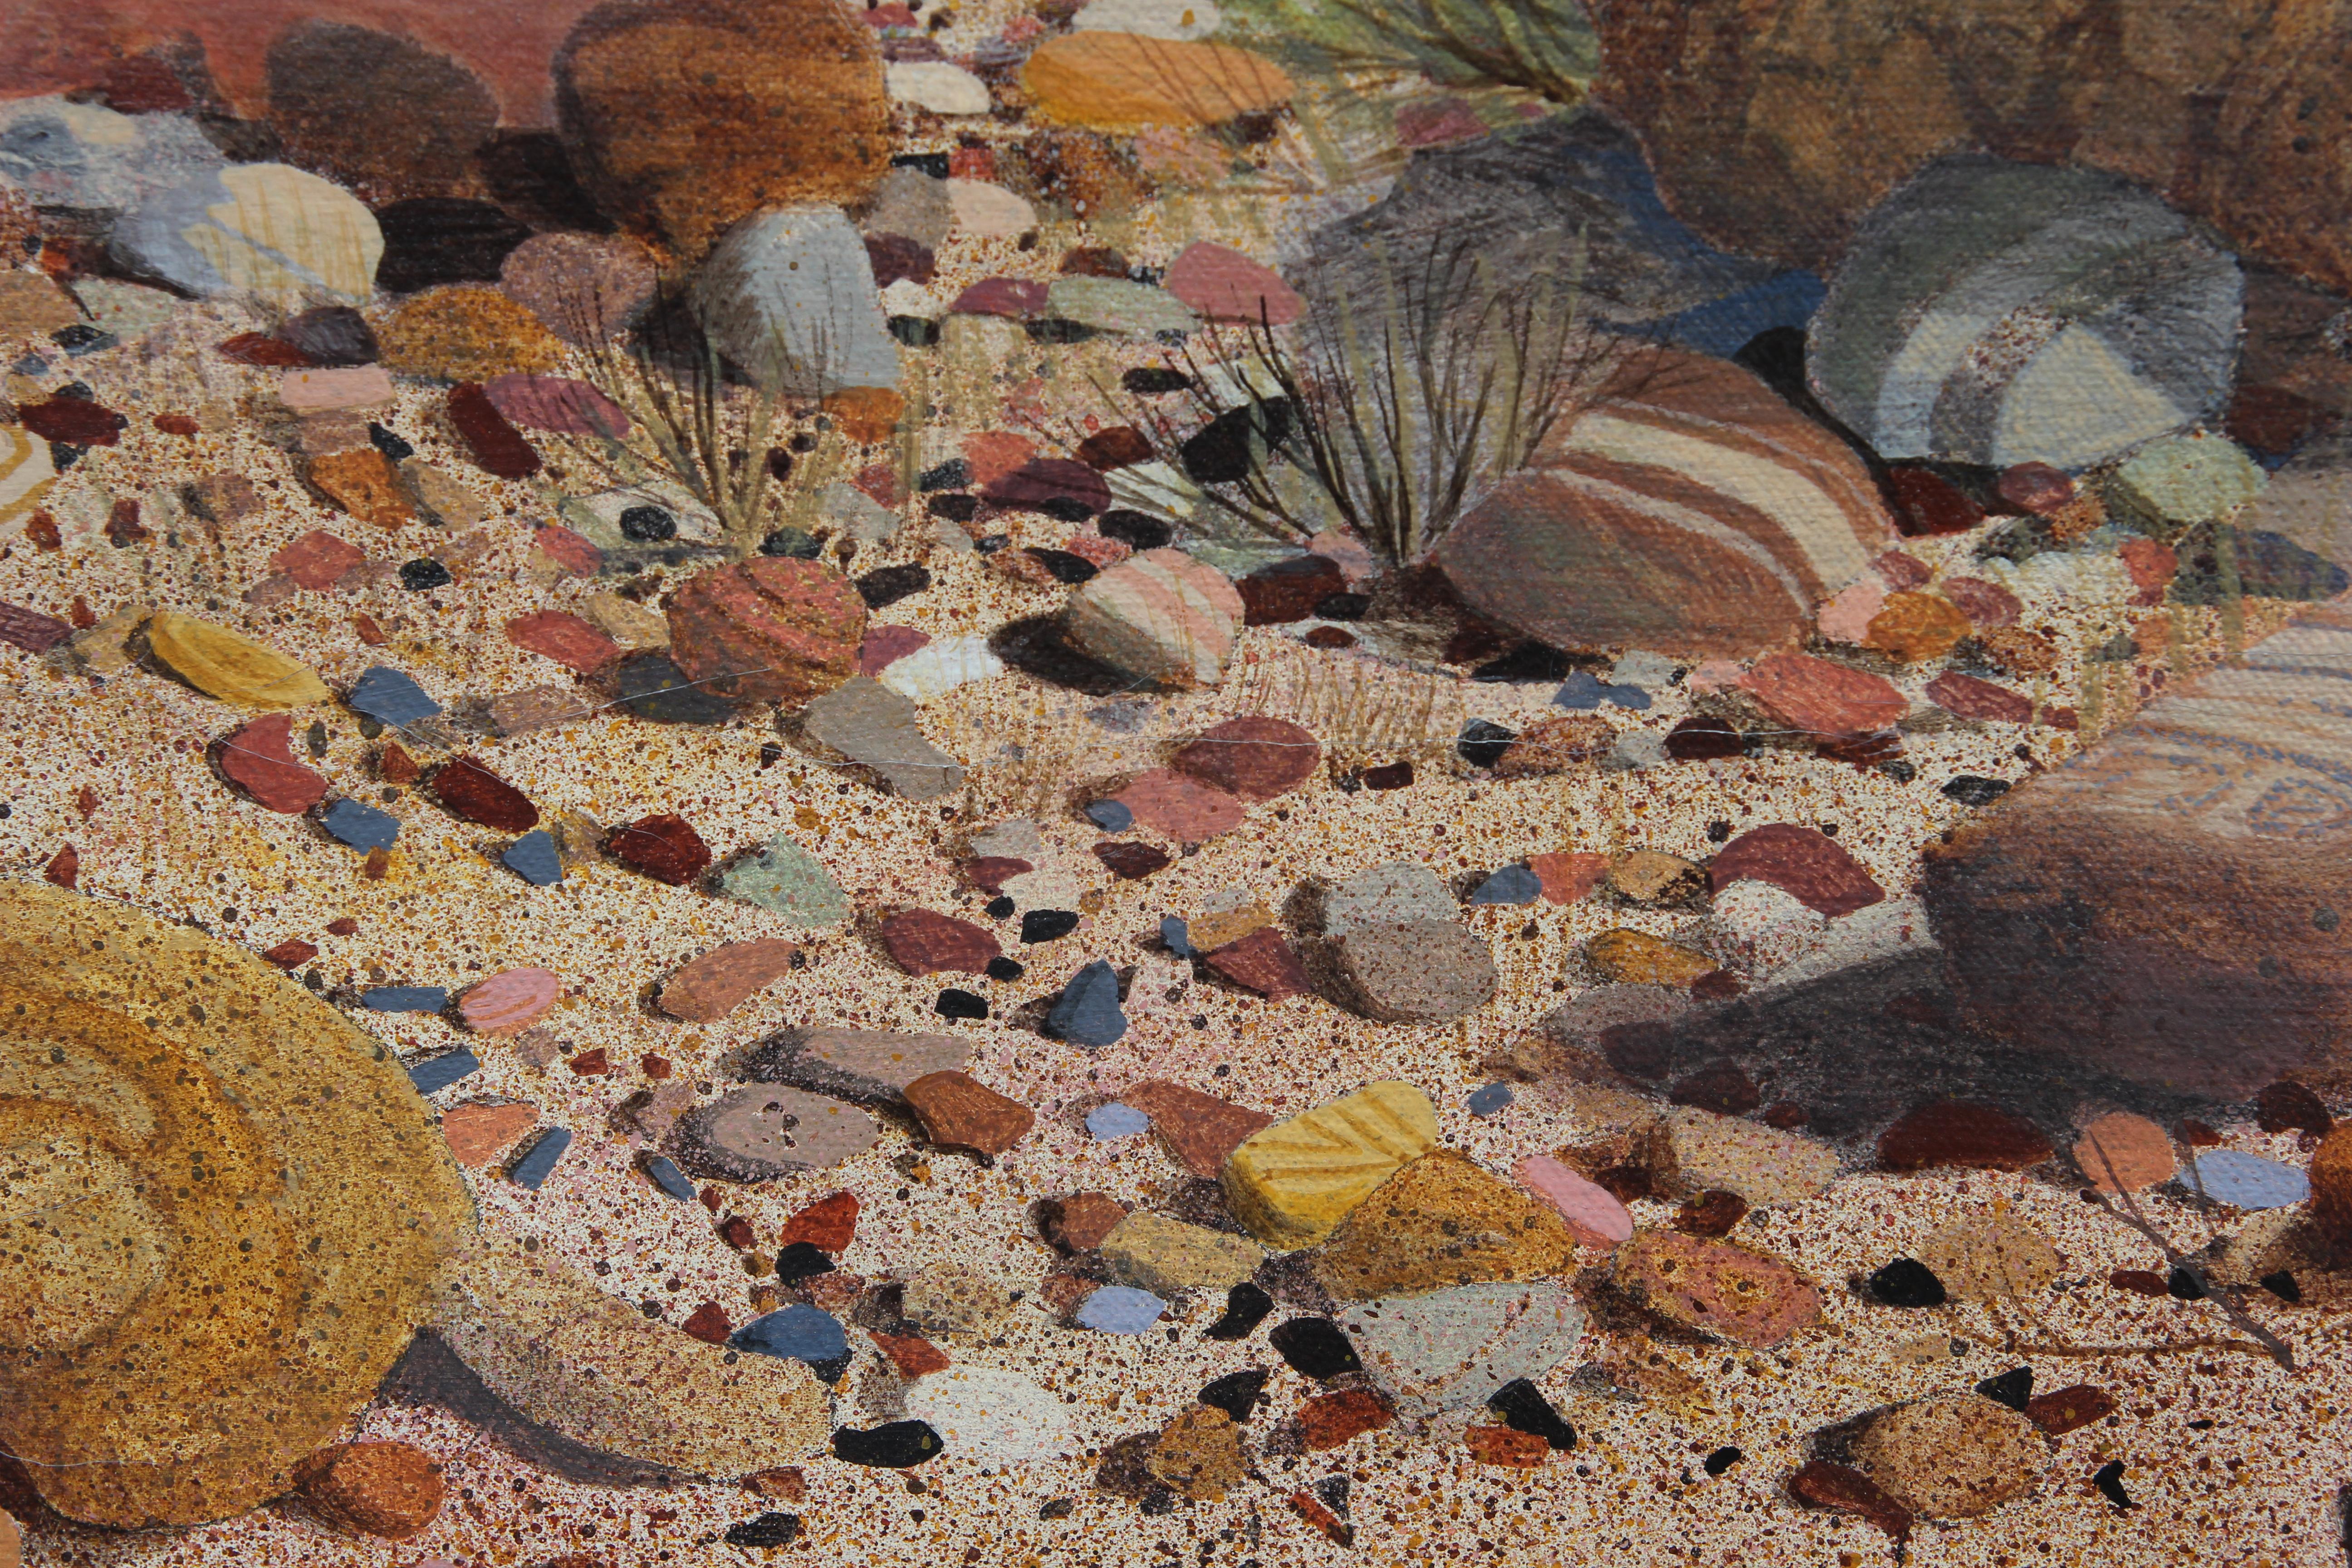 Hyper-realistic landscape painting of a desert landscape with mountains in the background. In the foreground is a well-painted collection of colorful rocks. The work is signed by Dennis Culver who is known for painting realistic landscapes. The